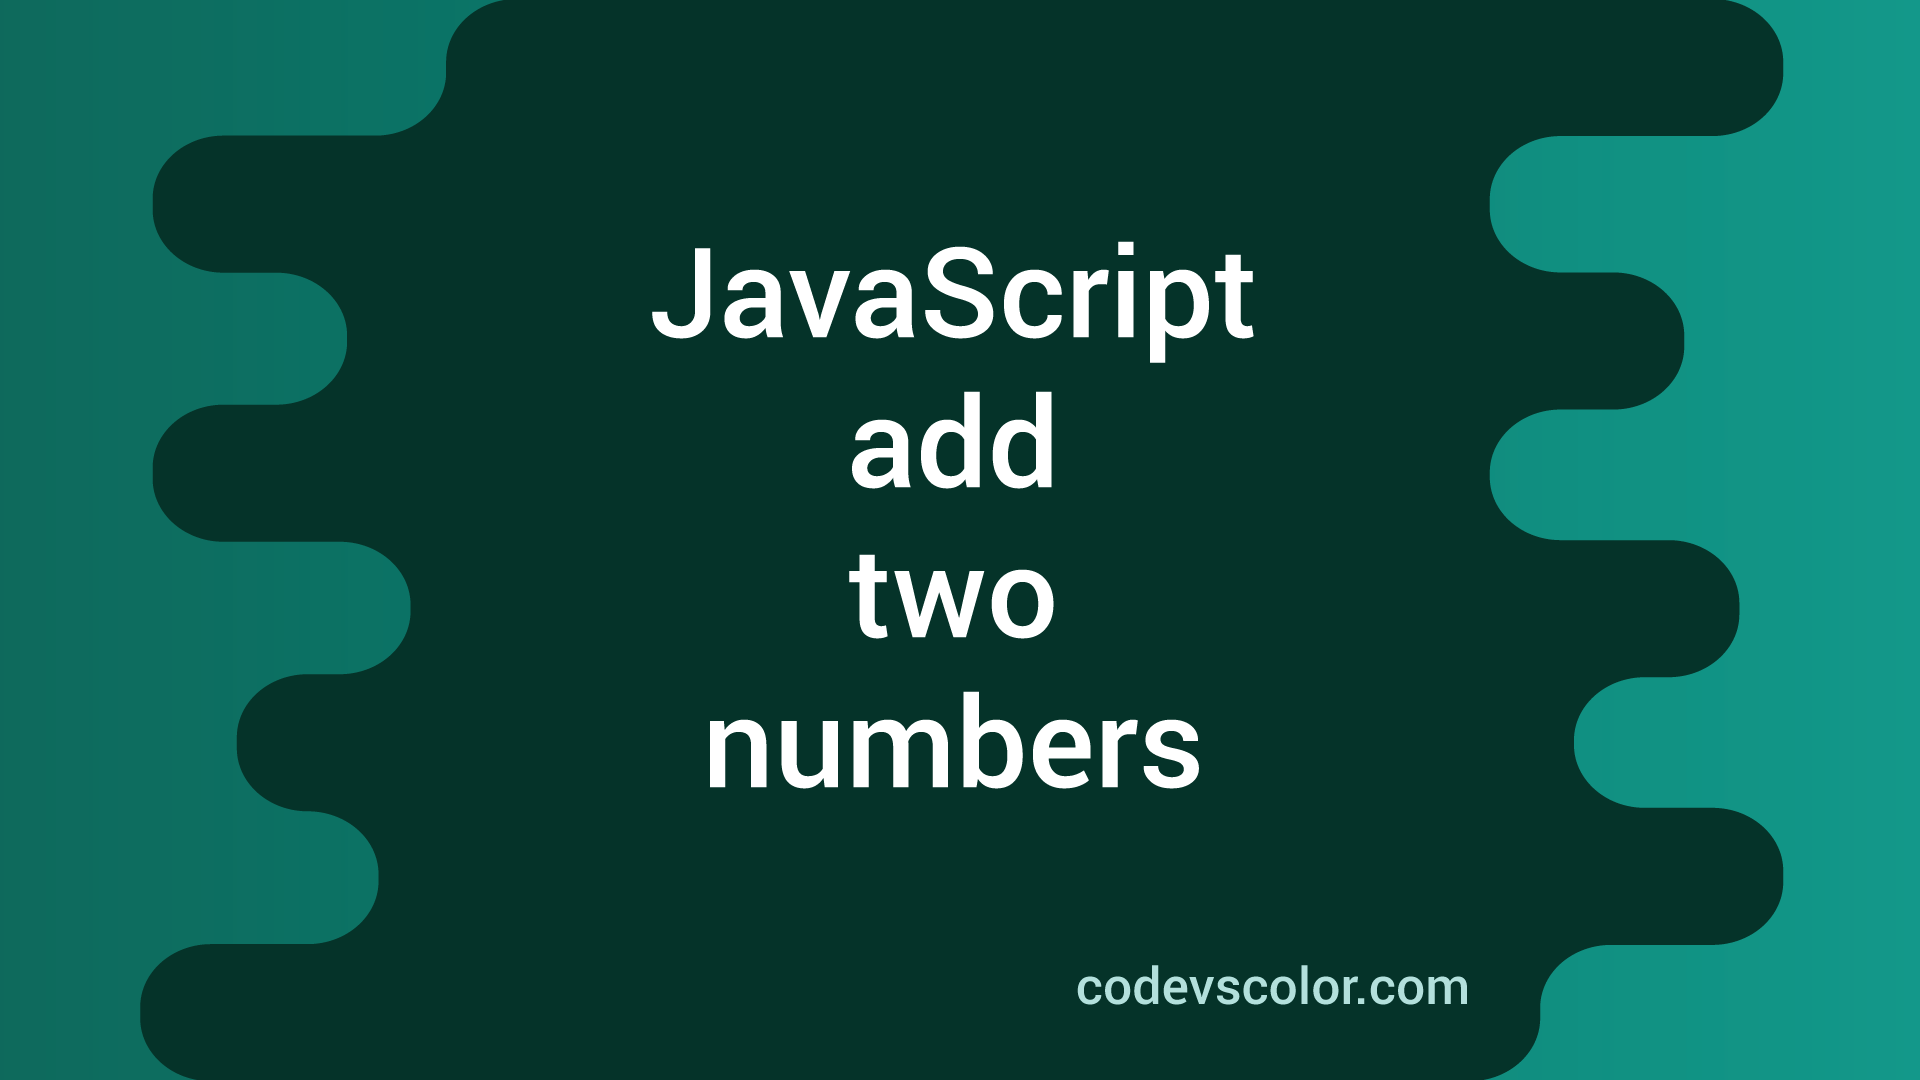 javascript-program-to-add-two-numbers-3-different-ways-codevscolor